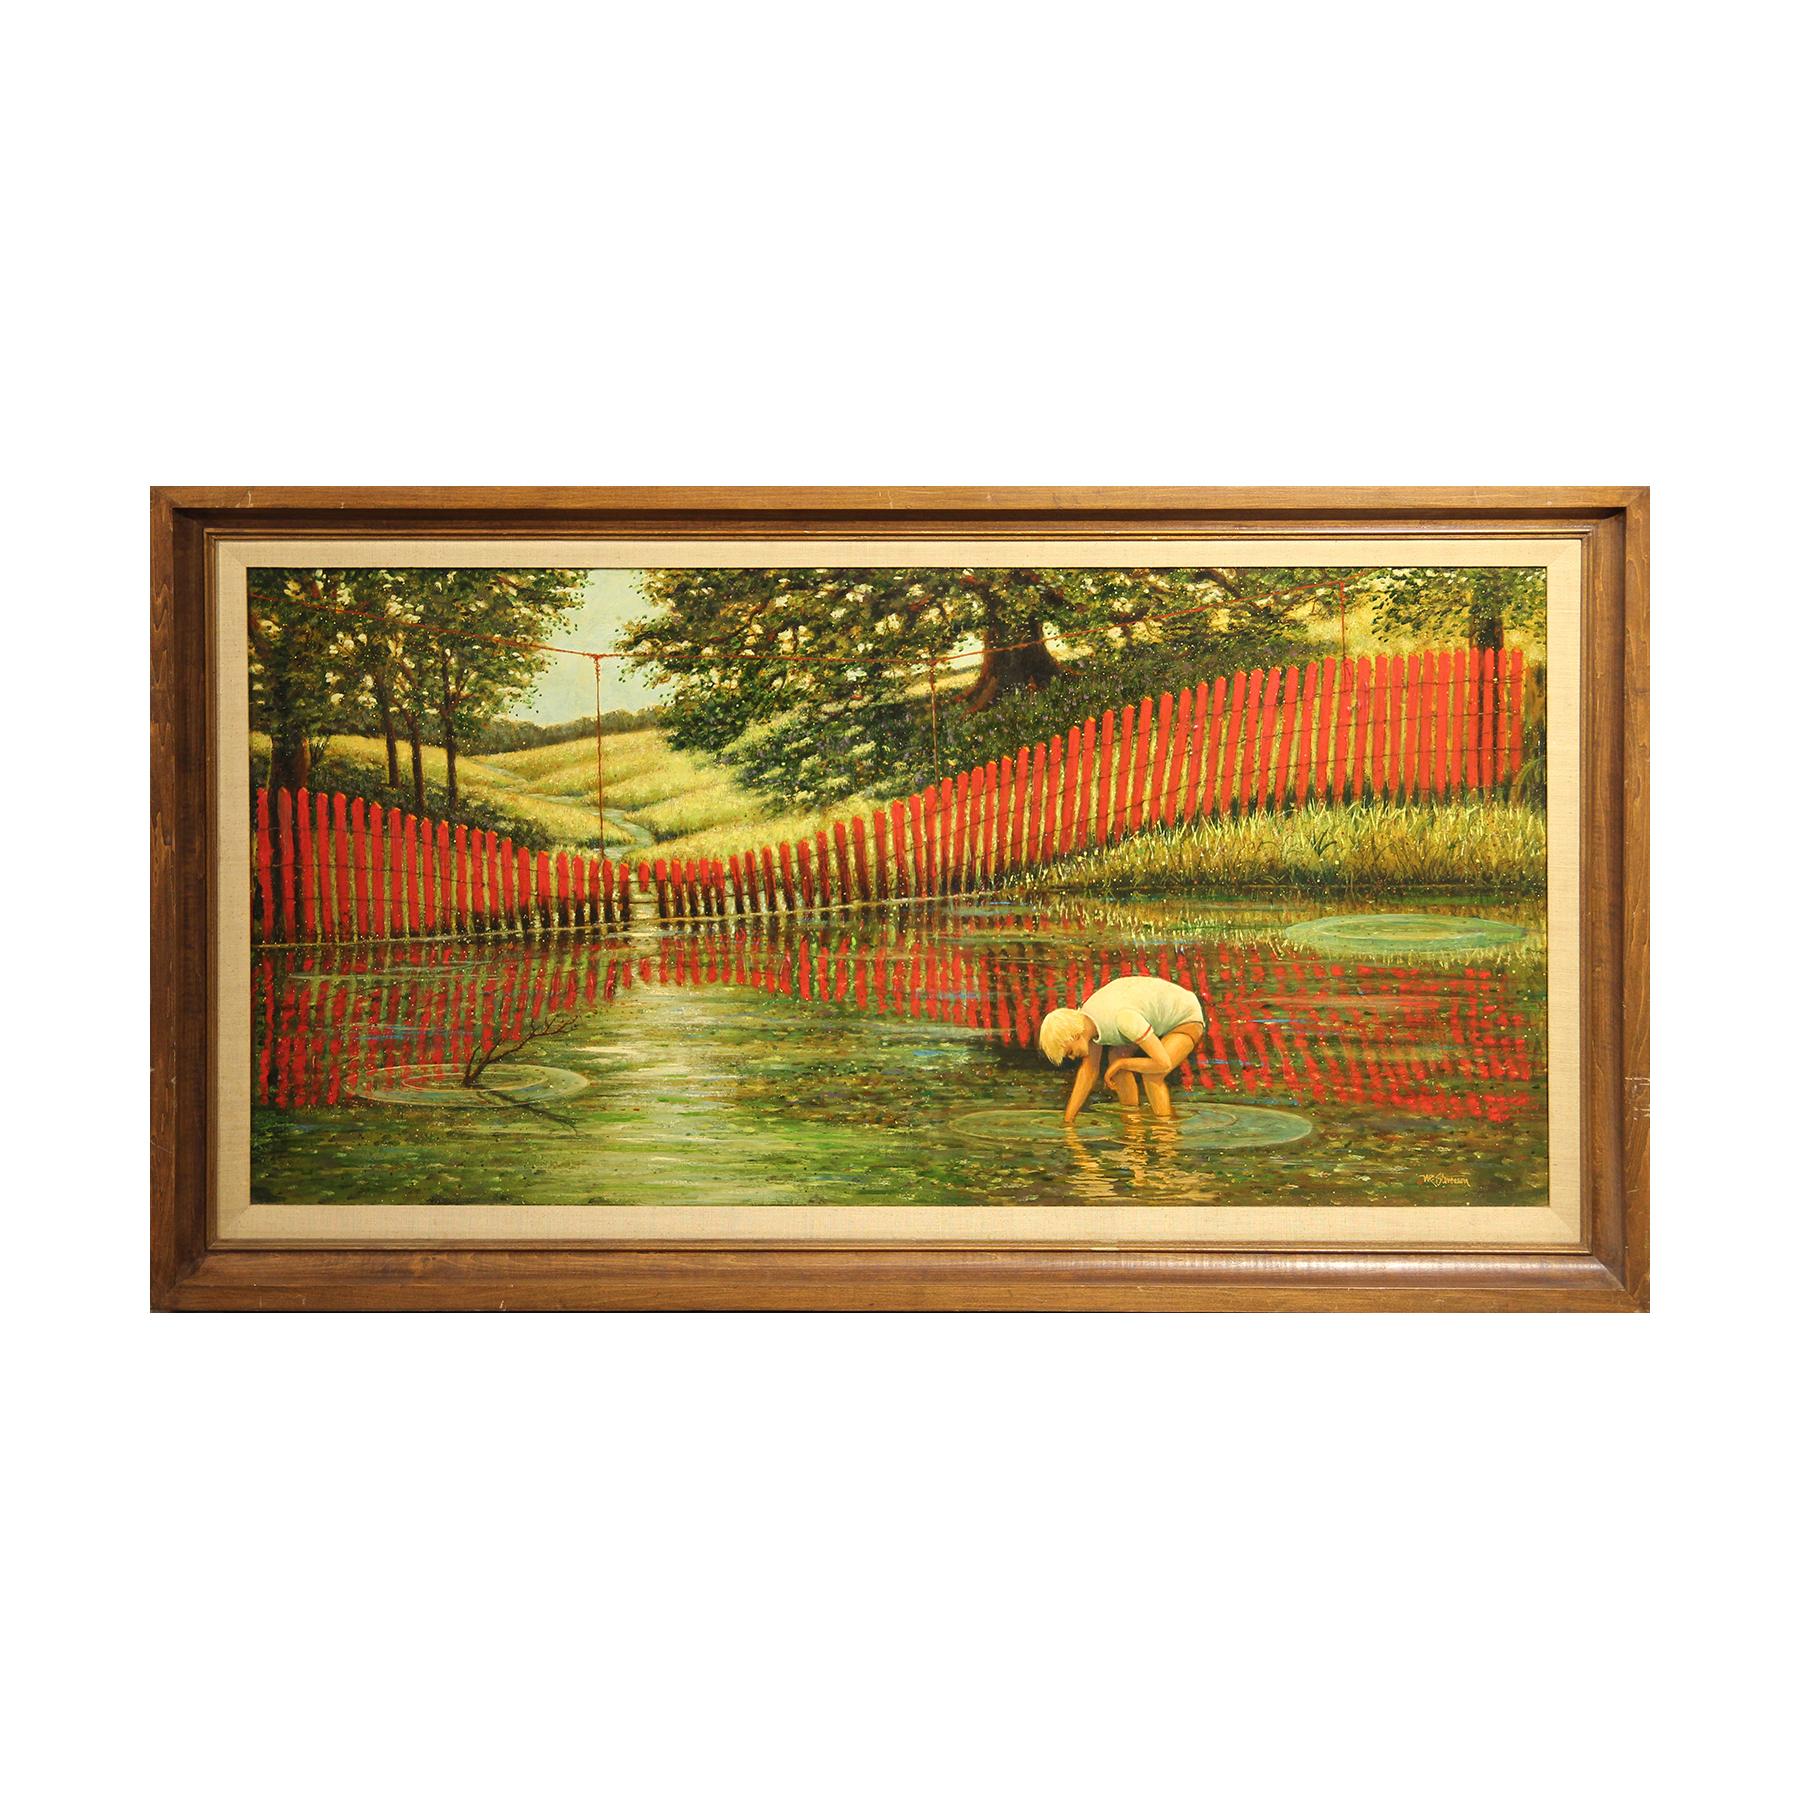 W. R. Stevenson Landscape Painting - Naturalistic Portrait of a Young Boy by a Red Fence Pastoral Country Painting